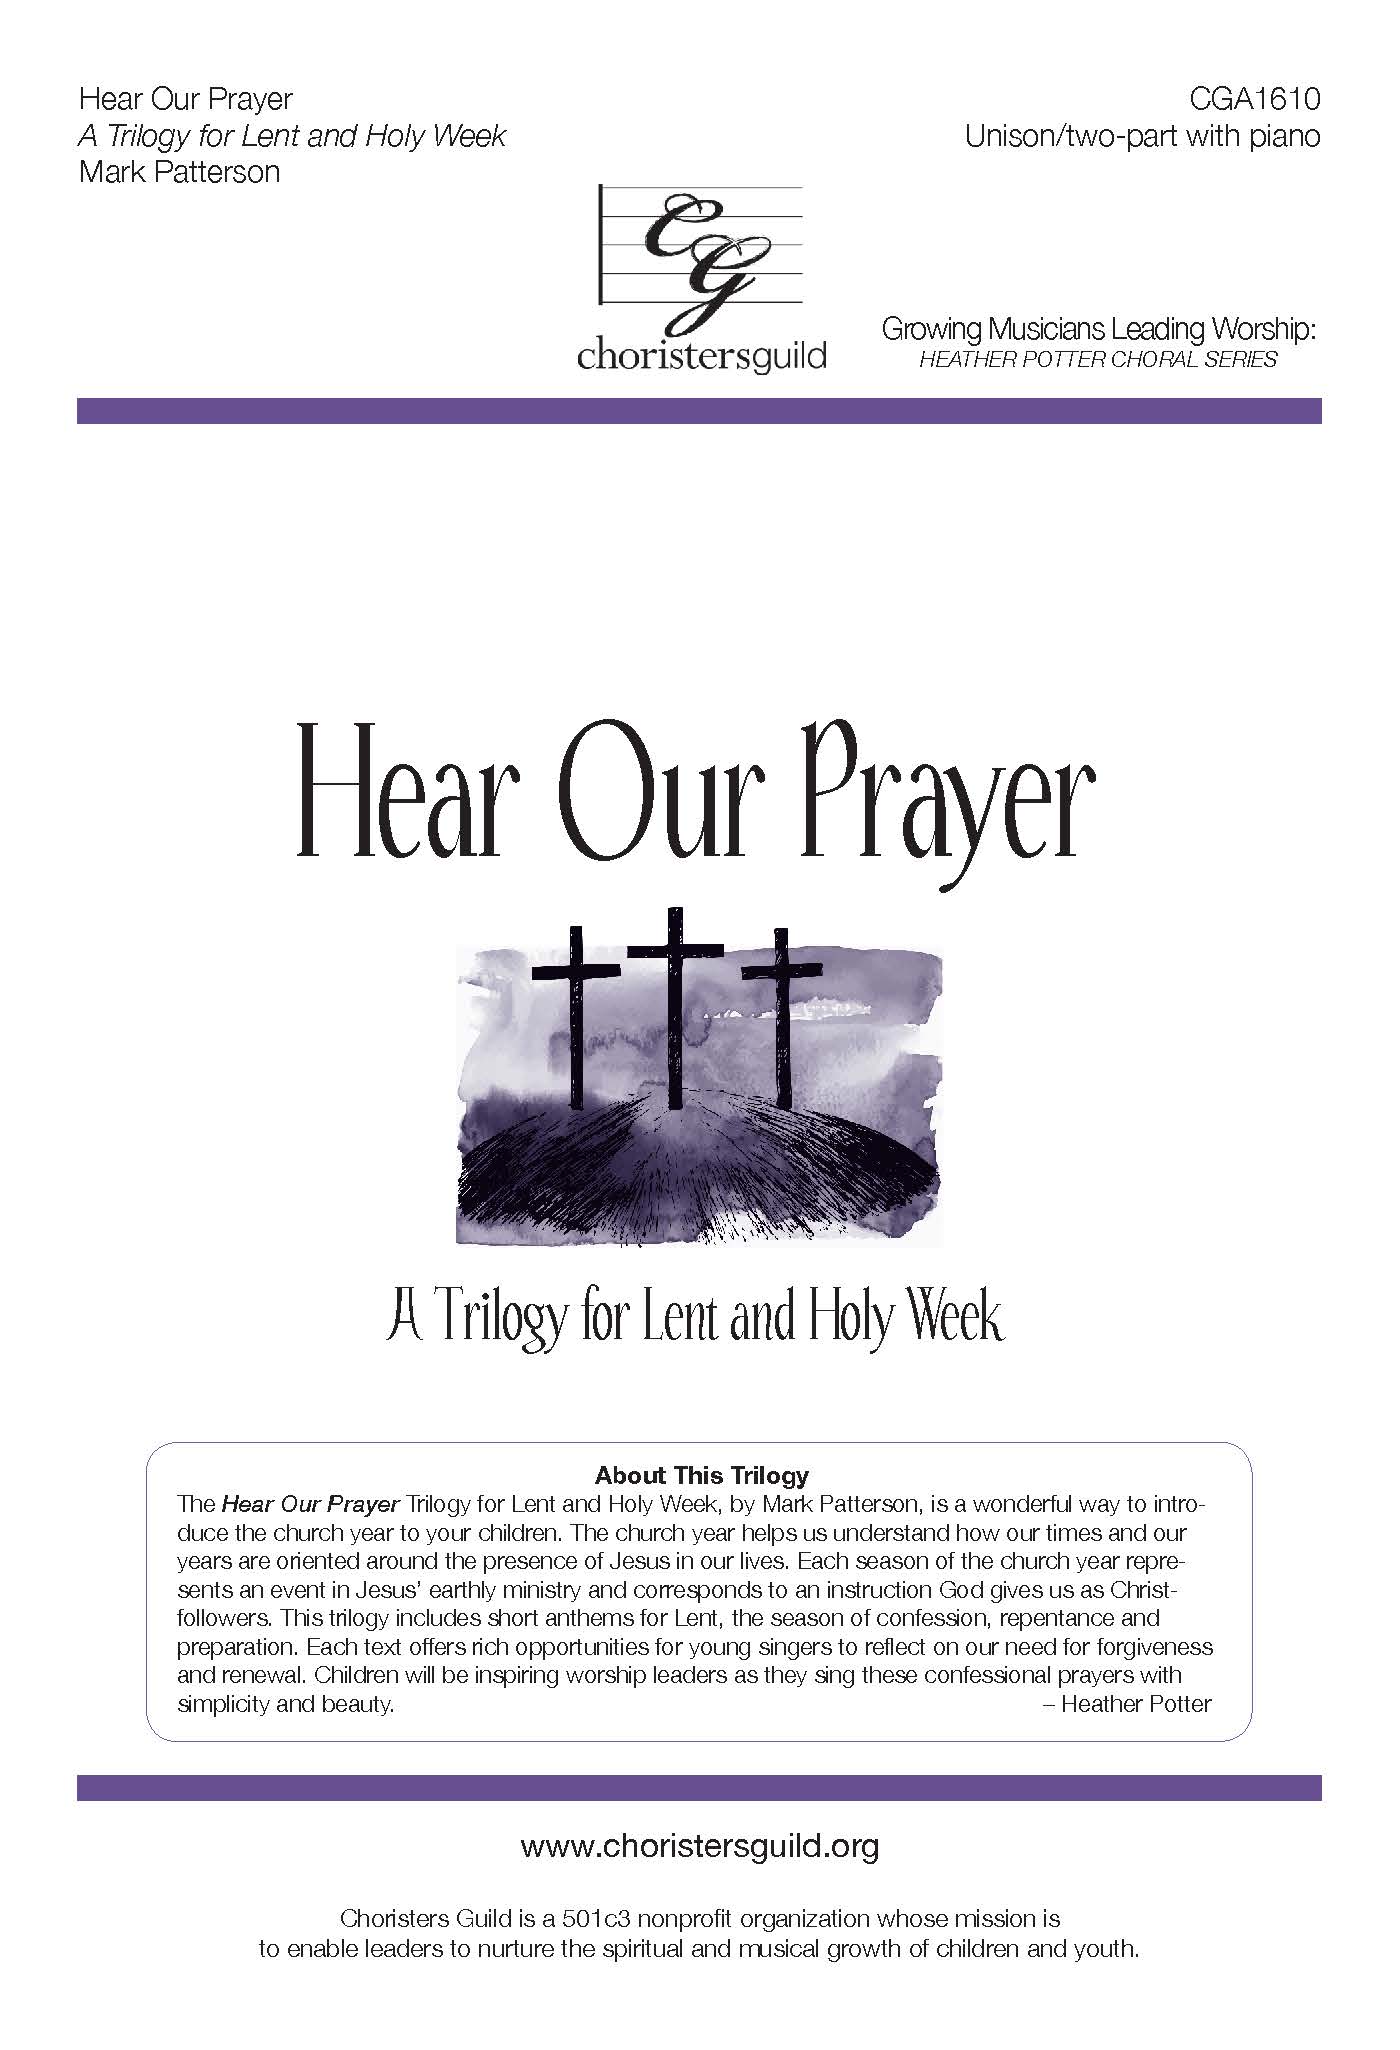 Hear Our Prayer: A Trilogy for Lent & Holy Week - Unison/Two-part